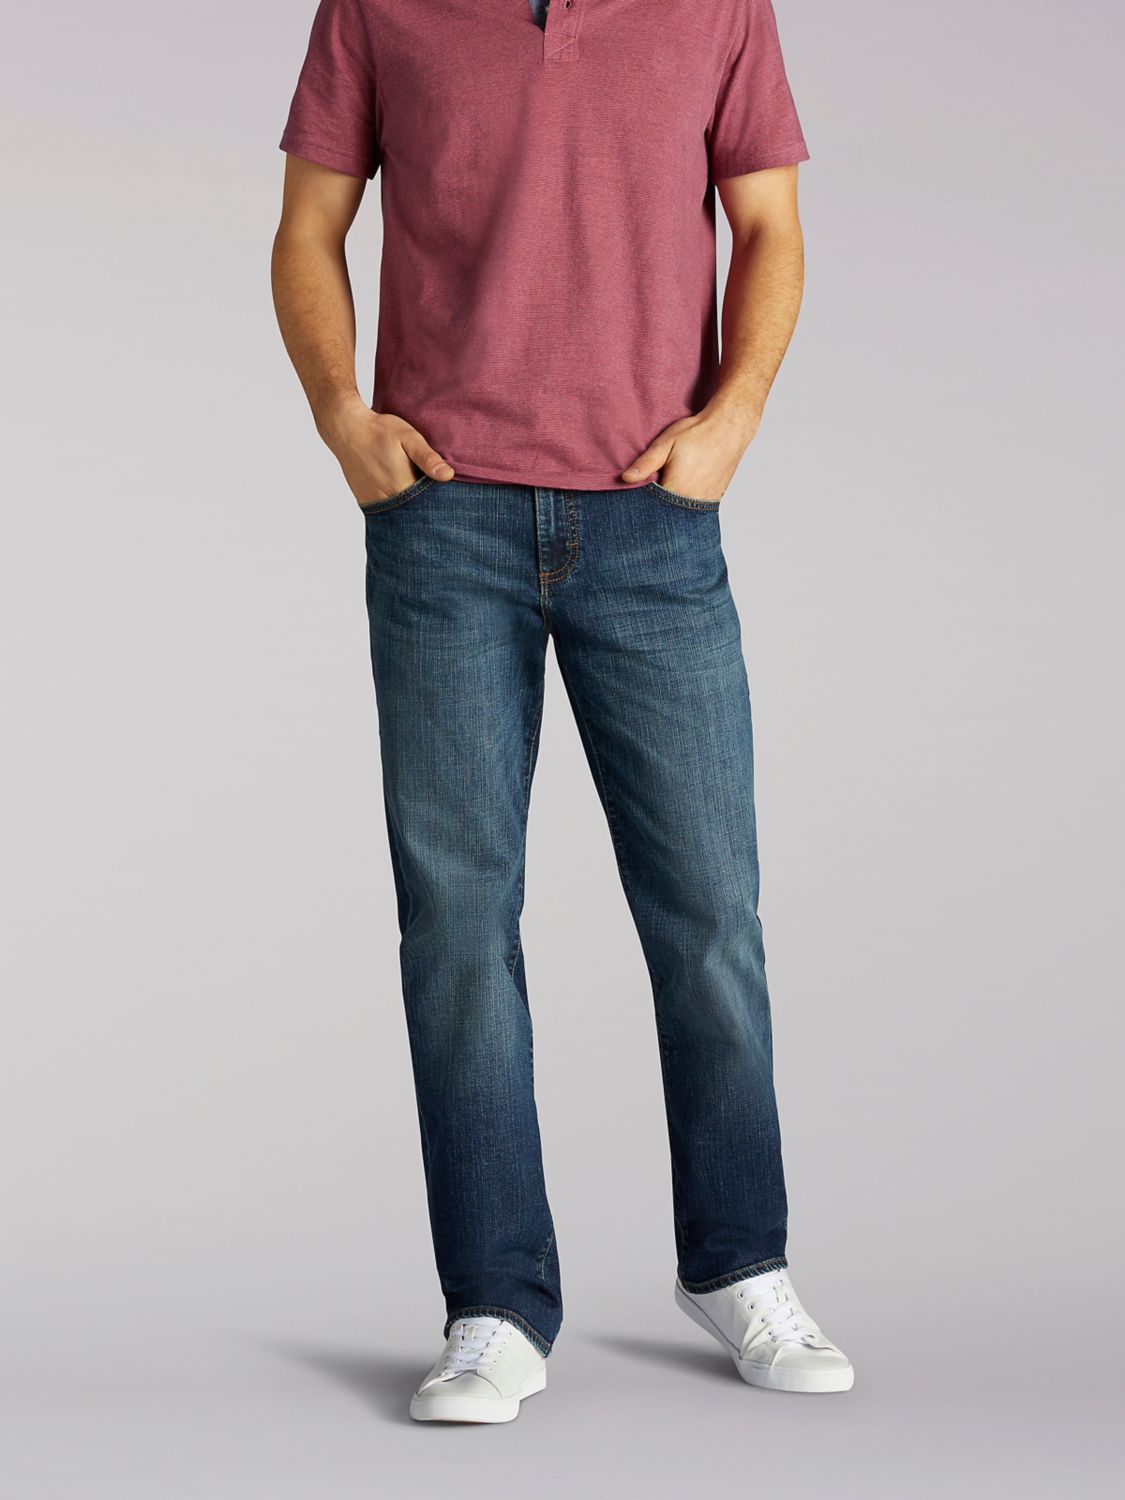 Modern Series Straight Leg Jean in Icon from Front View